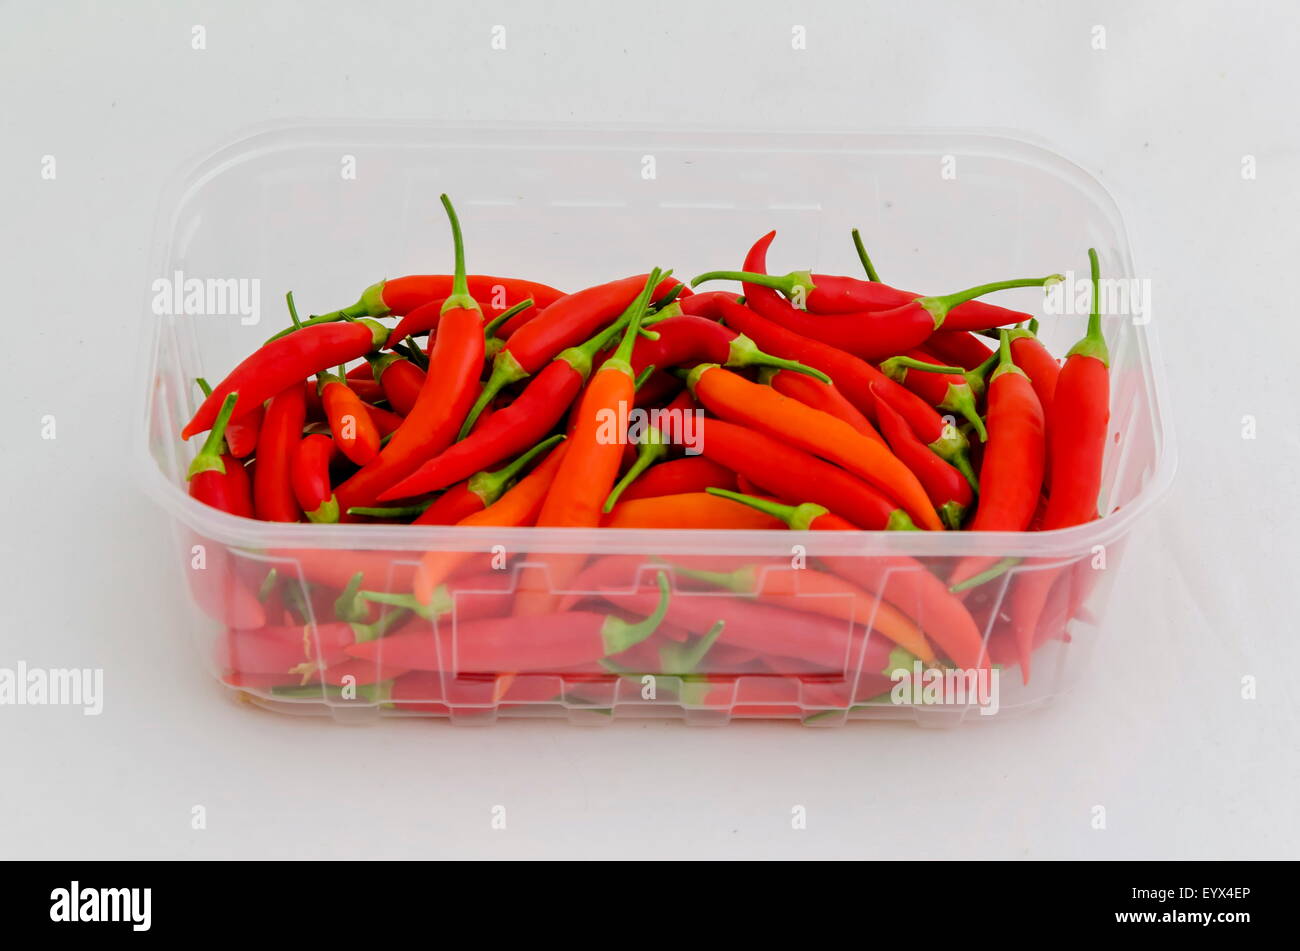 Red chillis (hot pepper) in vessel Stock Photo